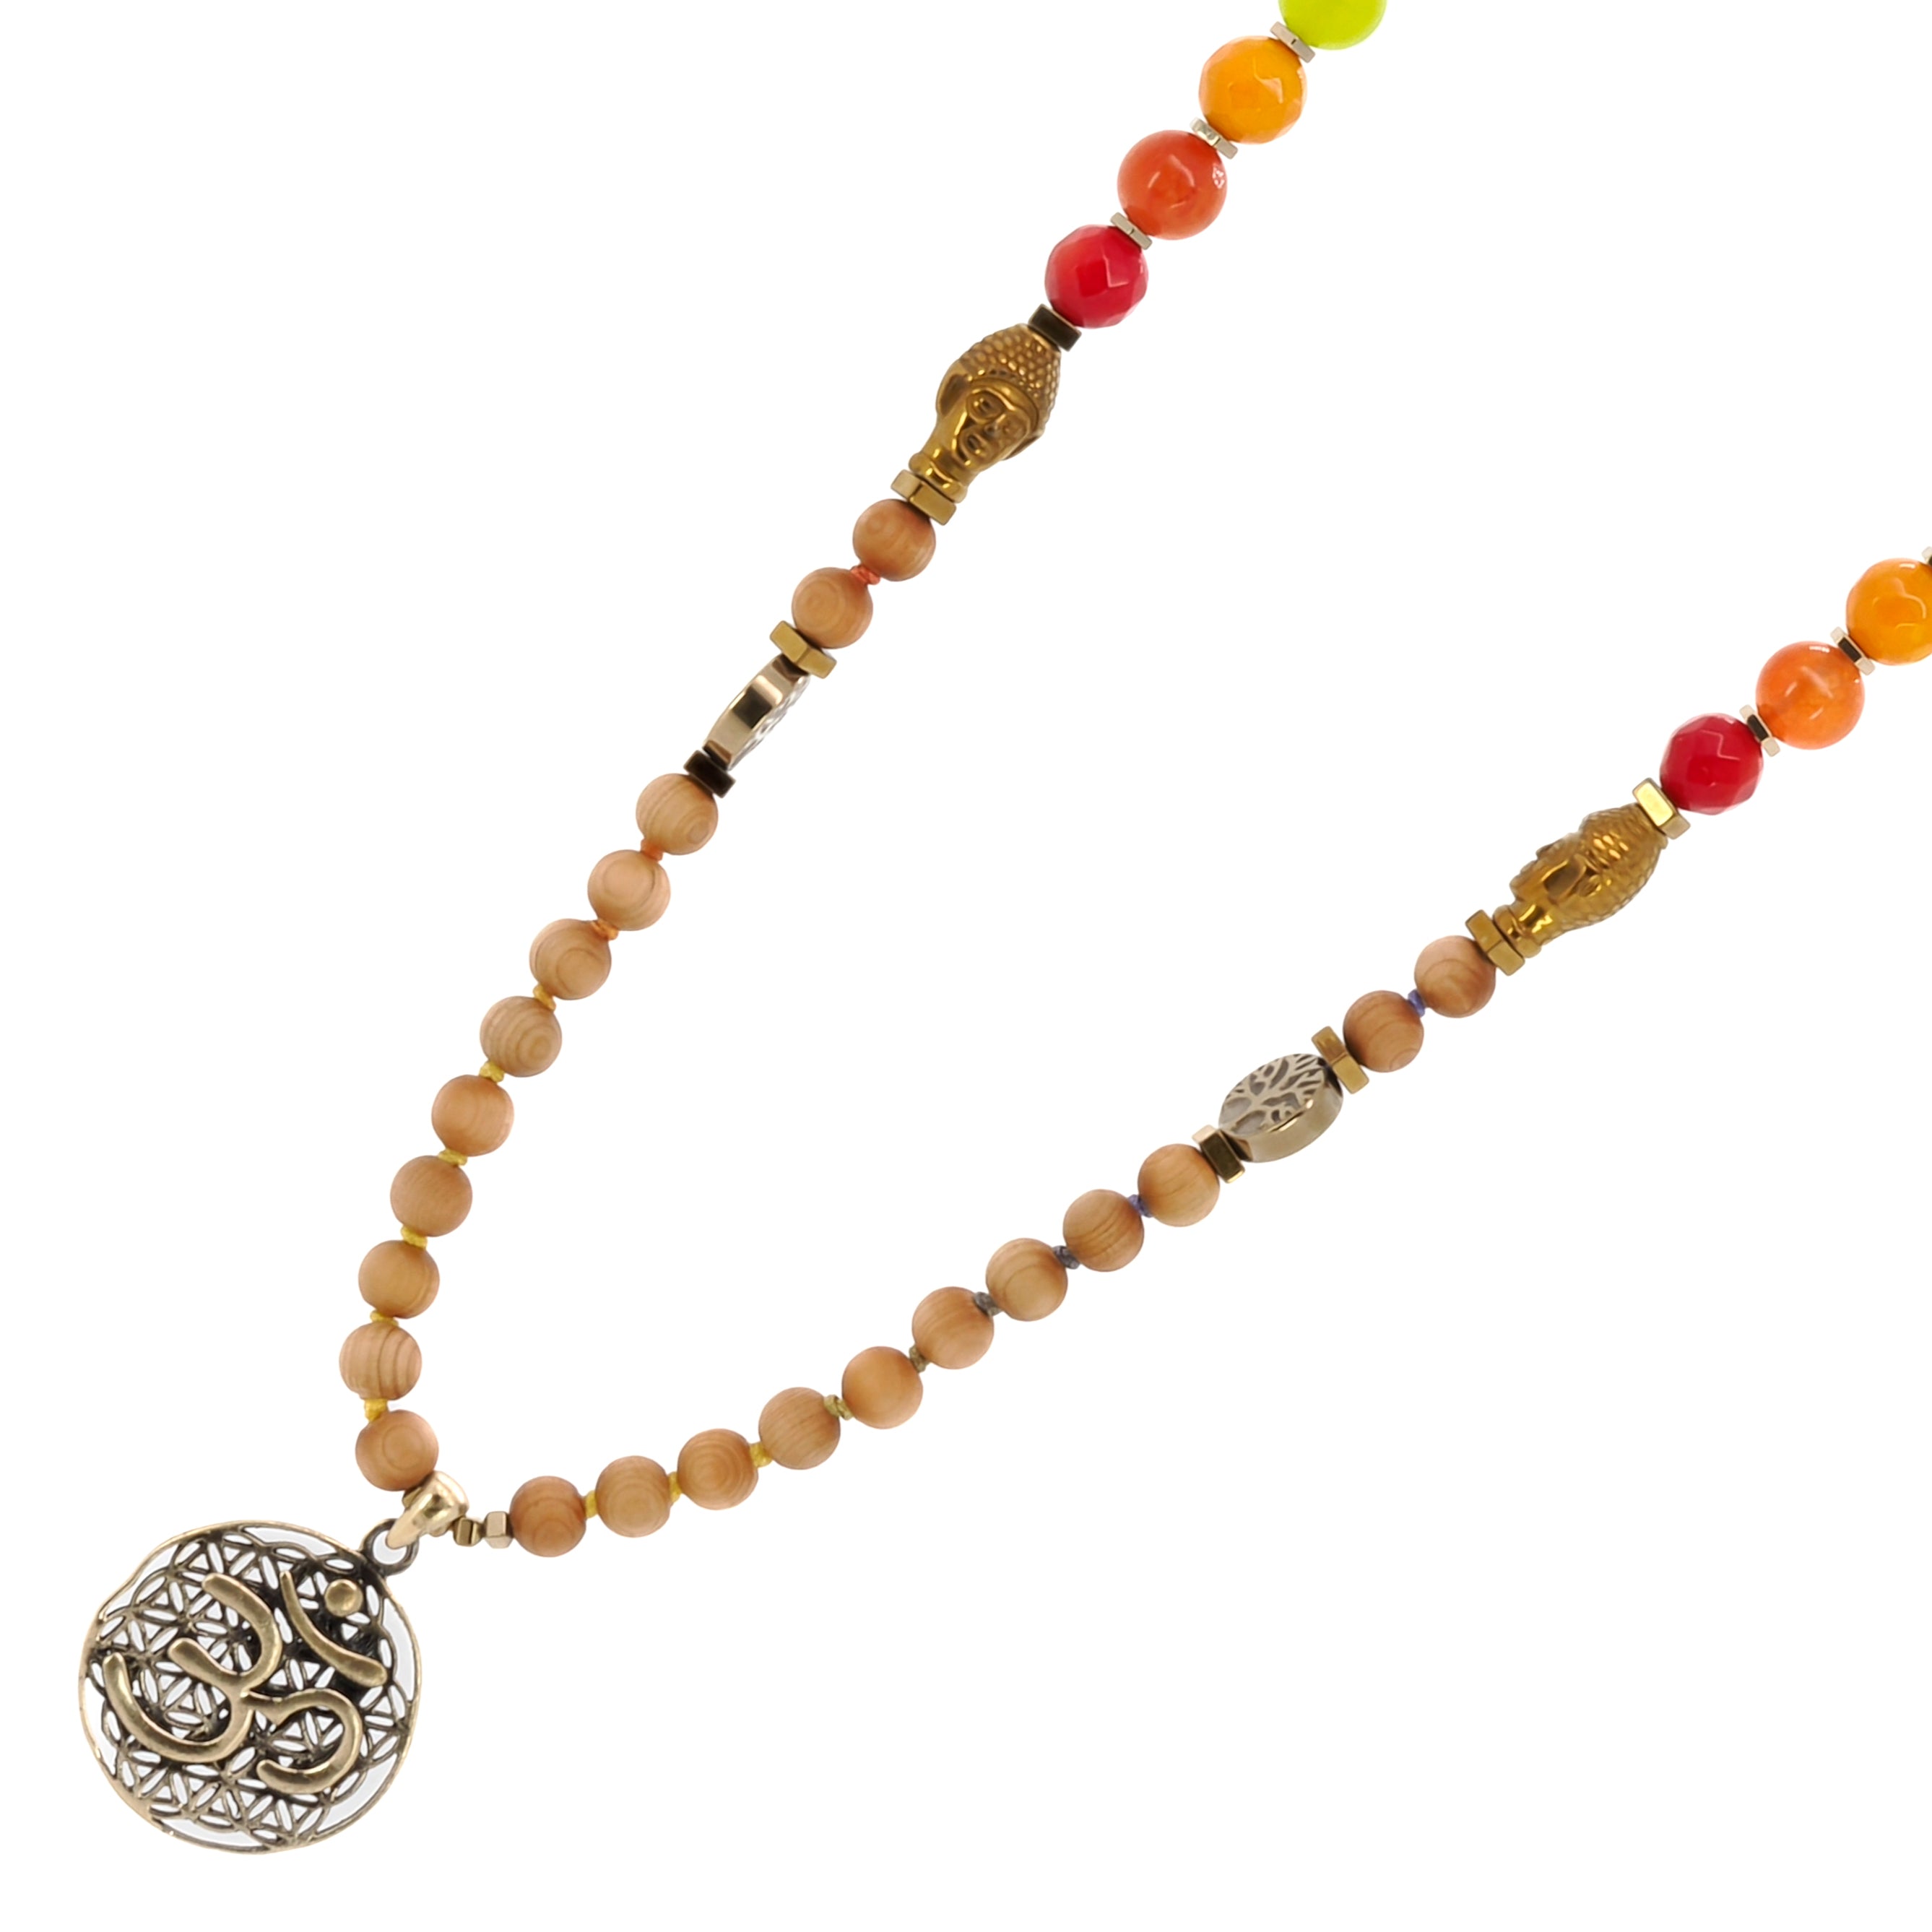 Experience the healing energy of natural sandalwood beads and chakra colors crystals with the Chakra Yoga Mala Necklace.